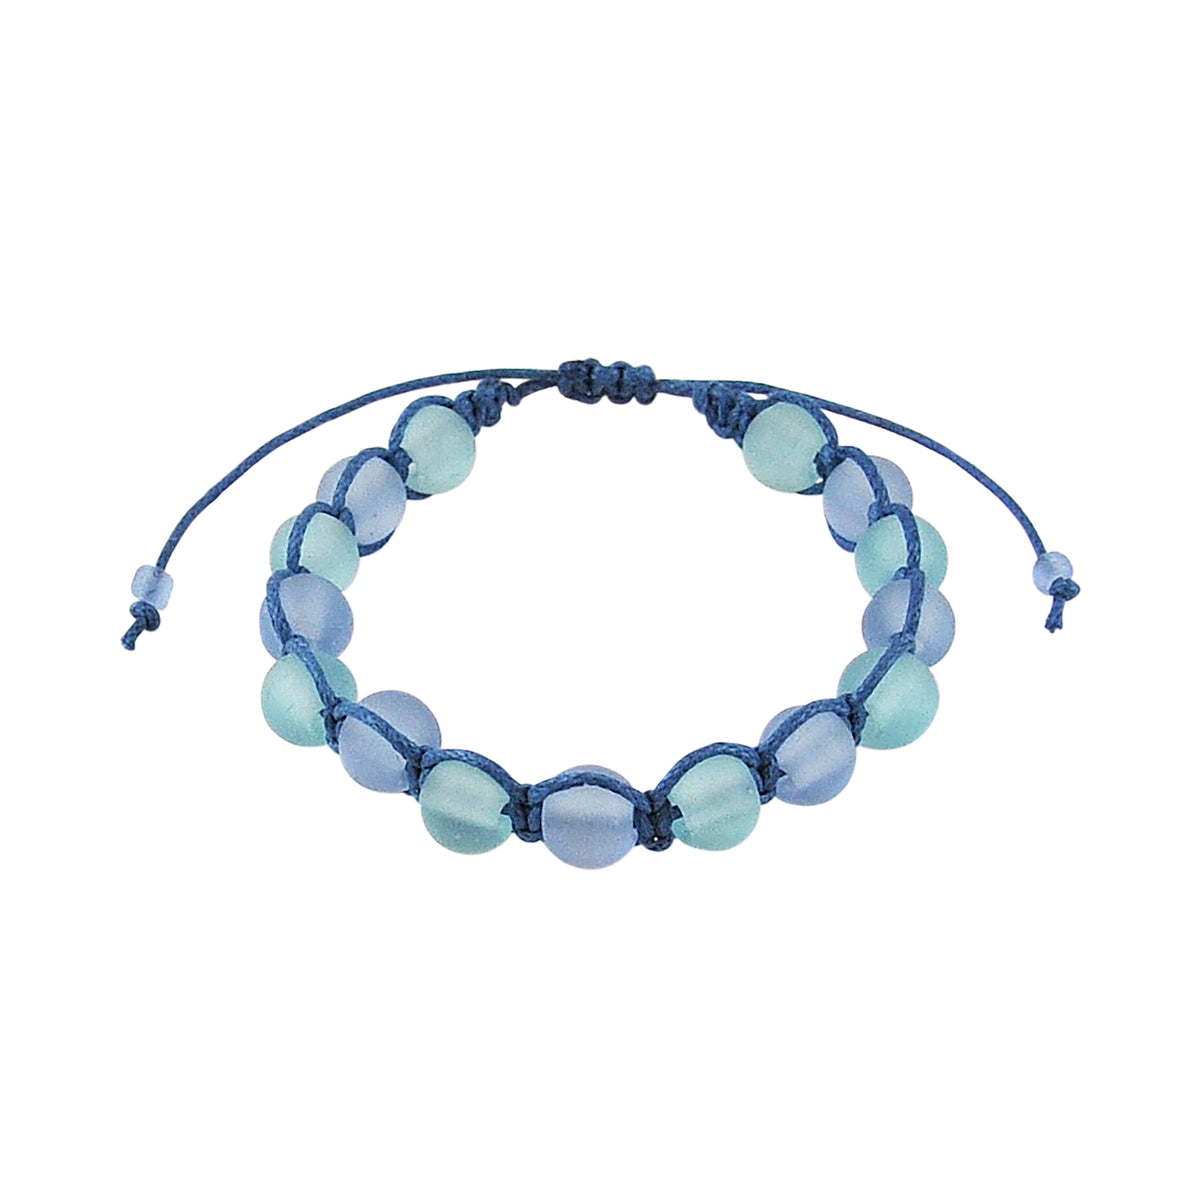 Multi-Colored Frosted Glass Bead String Bracelet - Viva life Jewellery